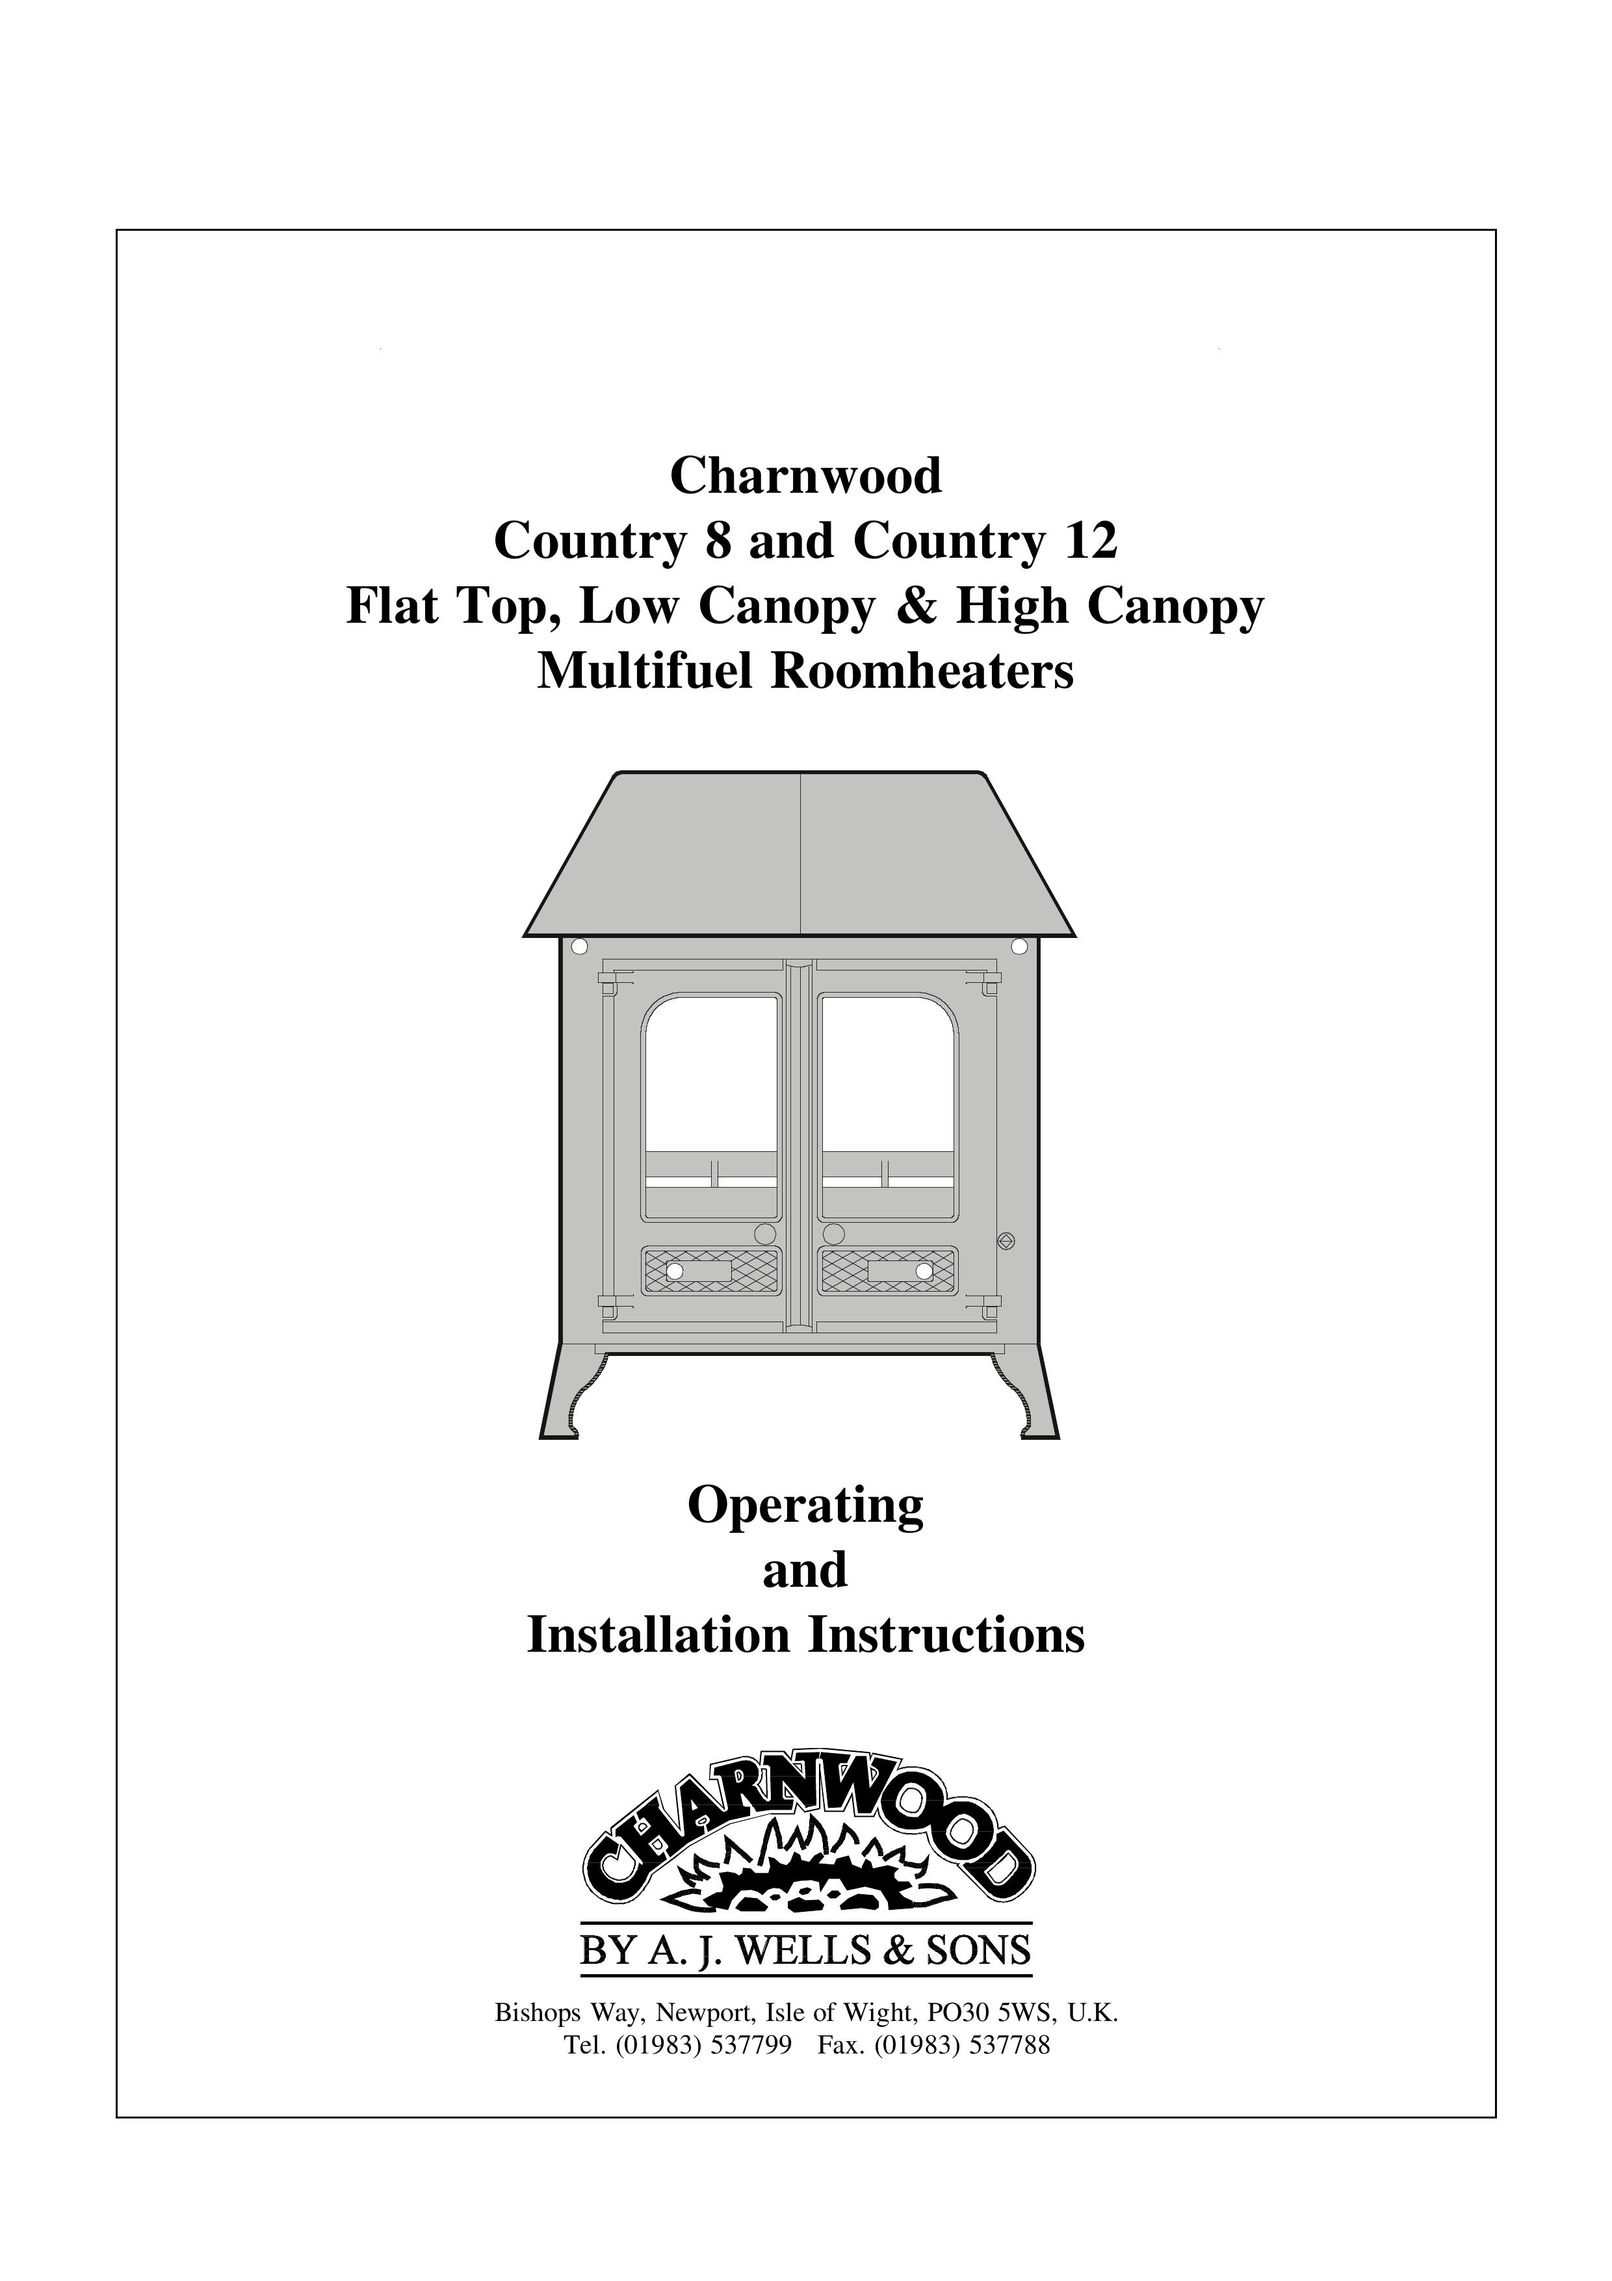 Charnwood Country 8 Electric Heater User Manual